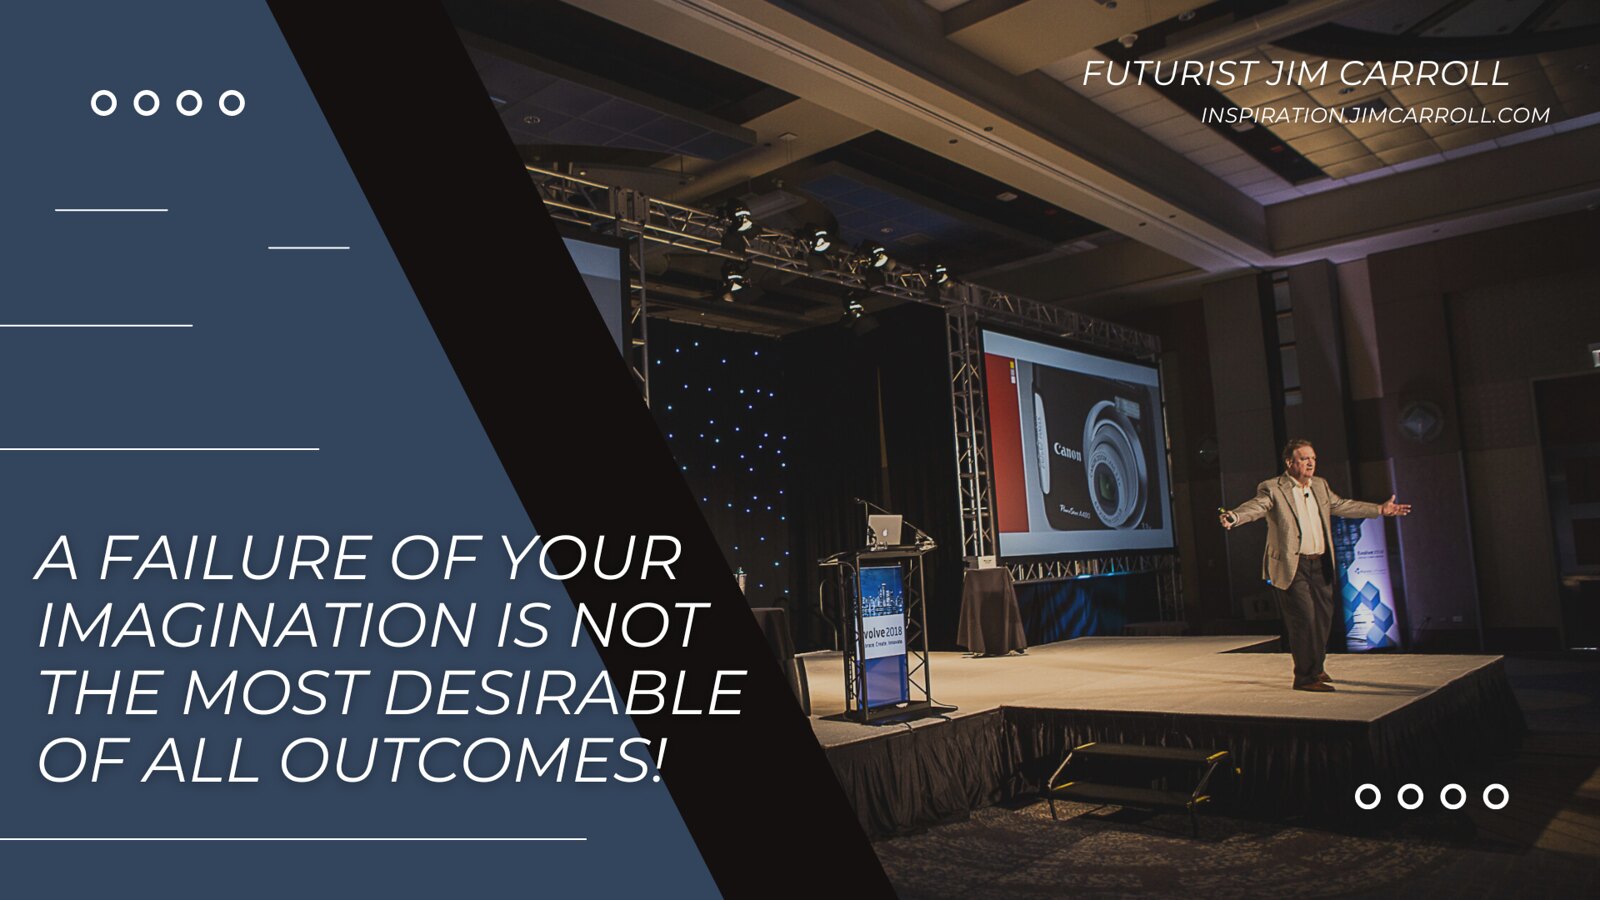 "A failure of your imagination is not the most desirable of all outcomes!" - Futurist Jim Carroll